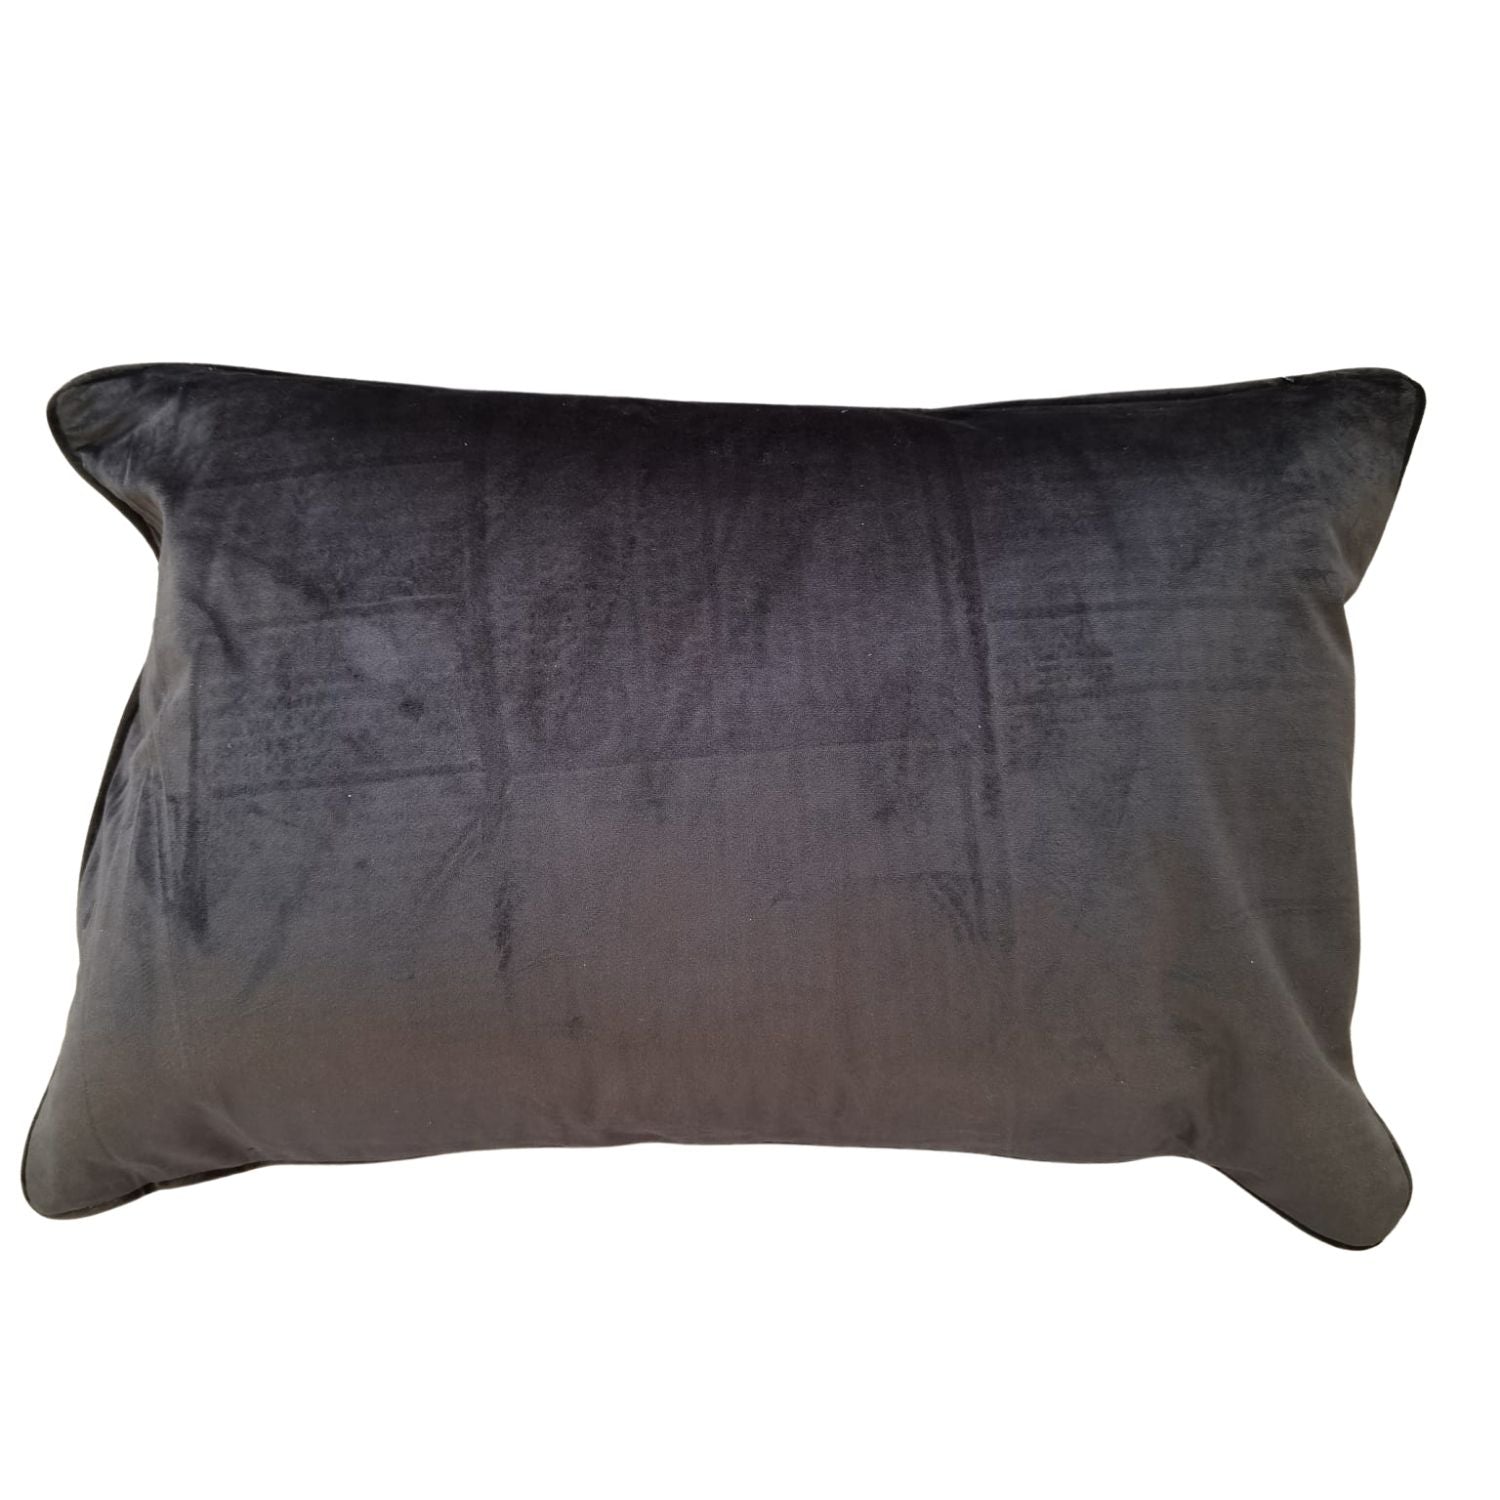 The Home Living Room Printed Piped Cushion - Light &amp; Dark 2 Shaws Department Stores